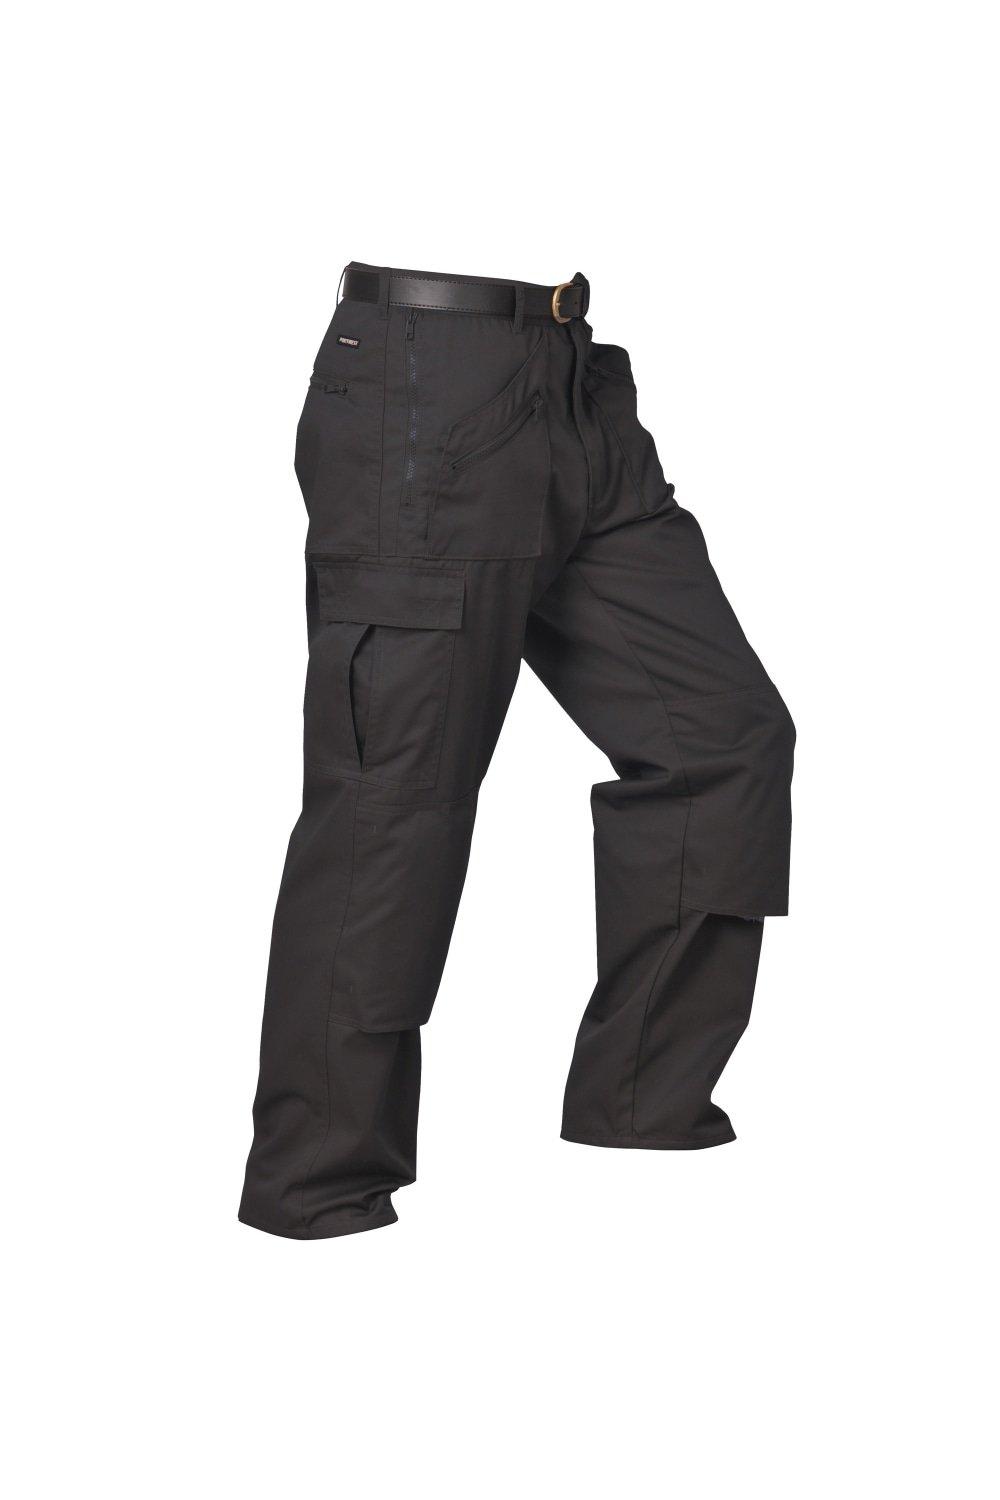 Action Workwear Trousers (S887) Pants